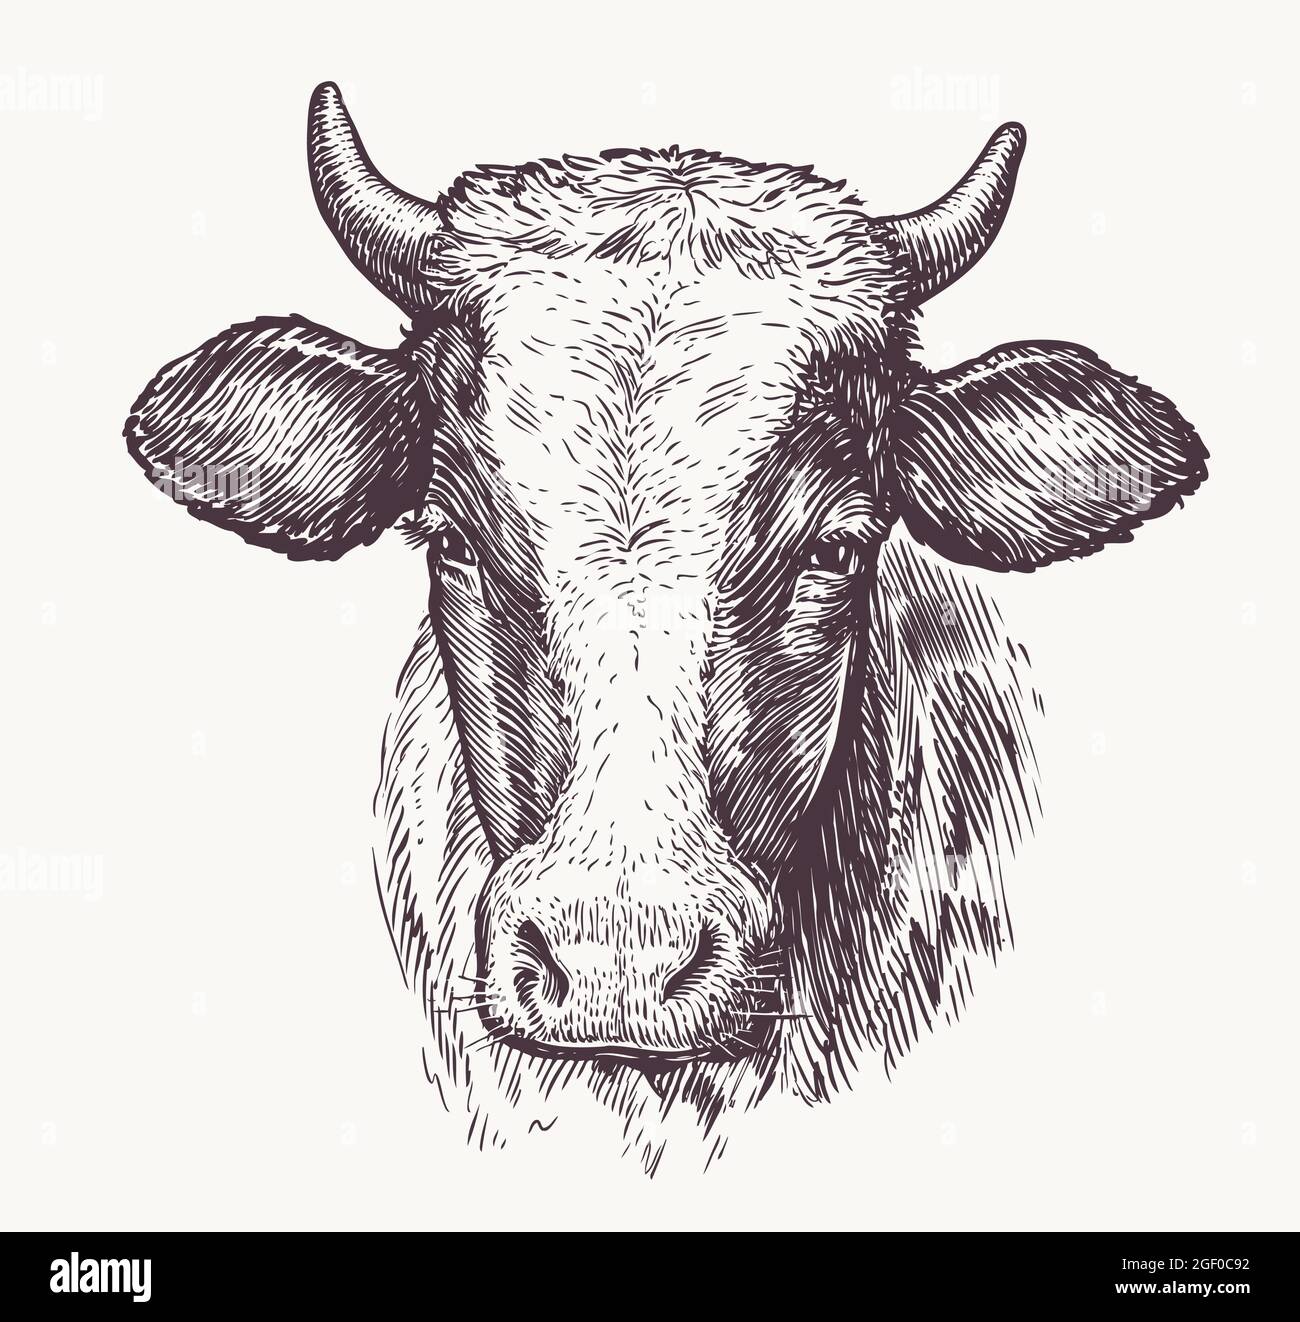 Drawing of isolated cow head with horns. Sketch illustration Stock Vector